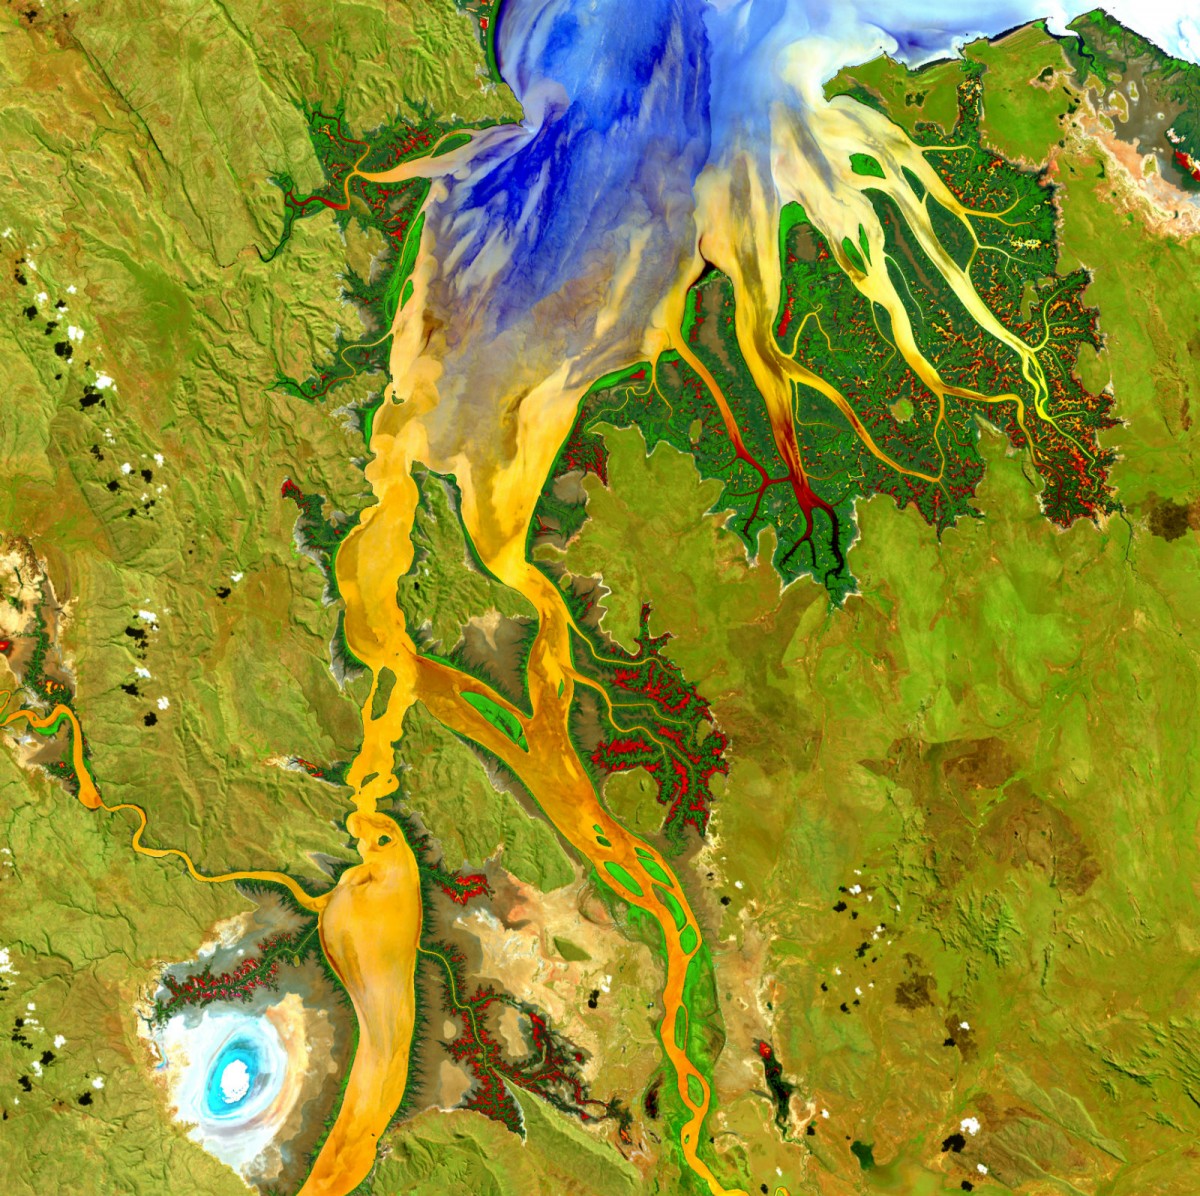 Satellite photo looking down on a yellow river running across a green landscape to join with a blue bay.